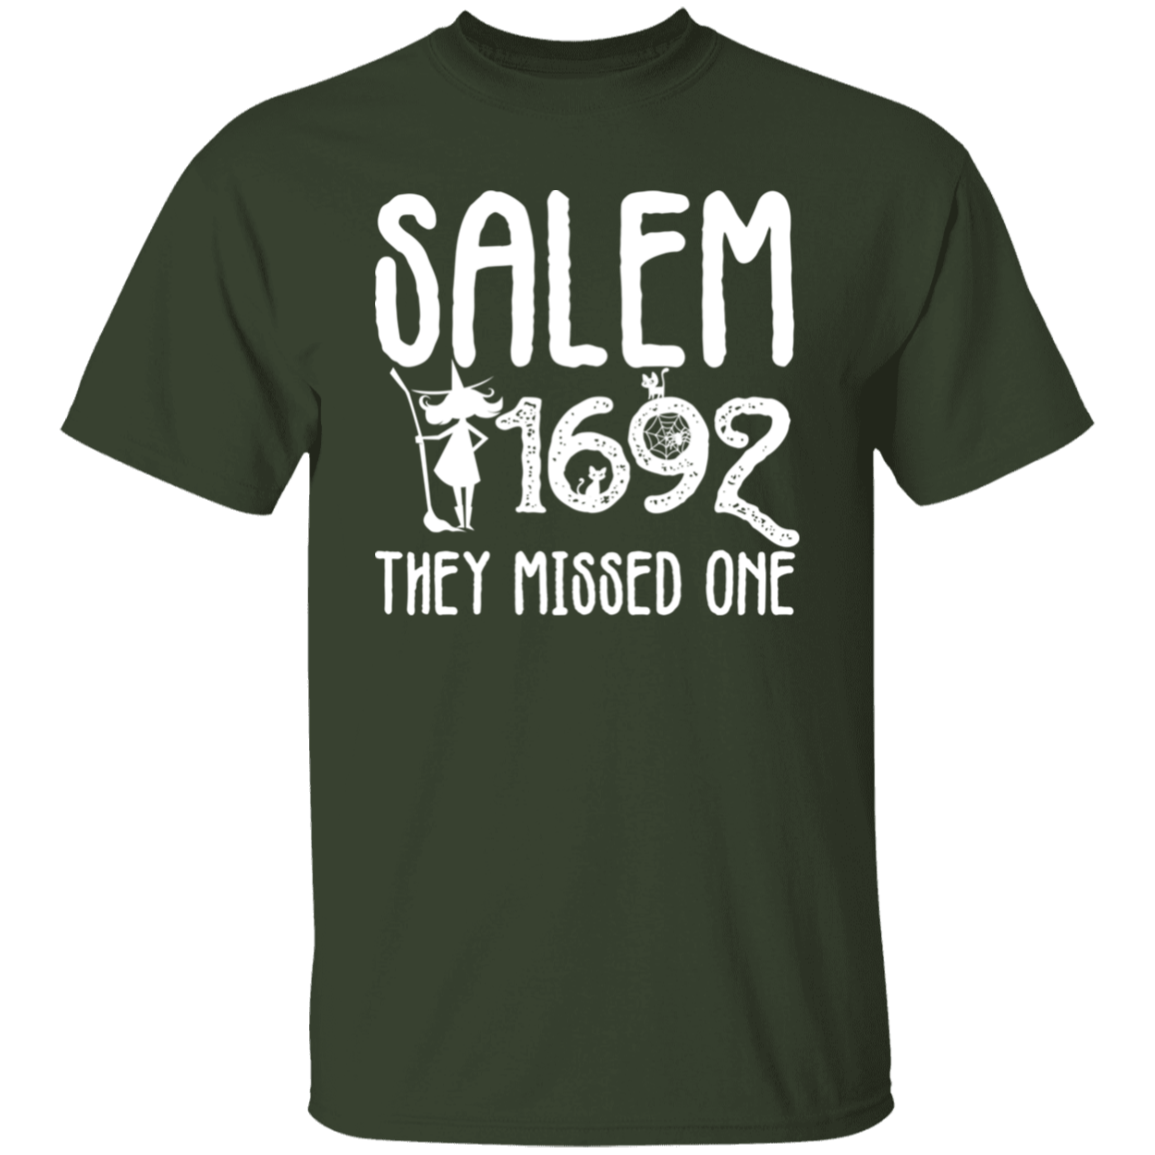 Salem They Missed One 1692 T-Shirt